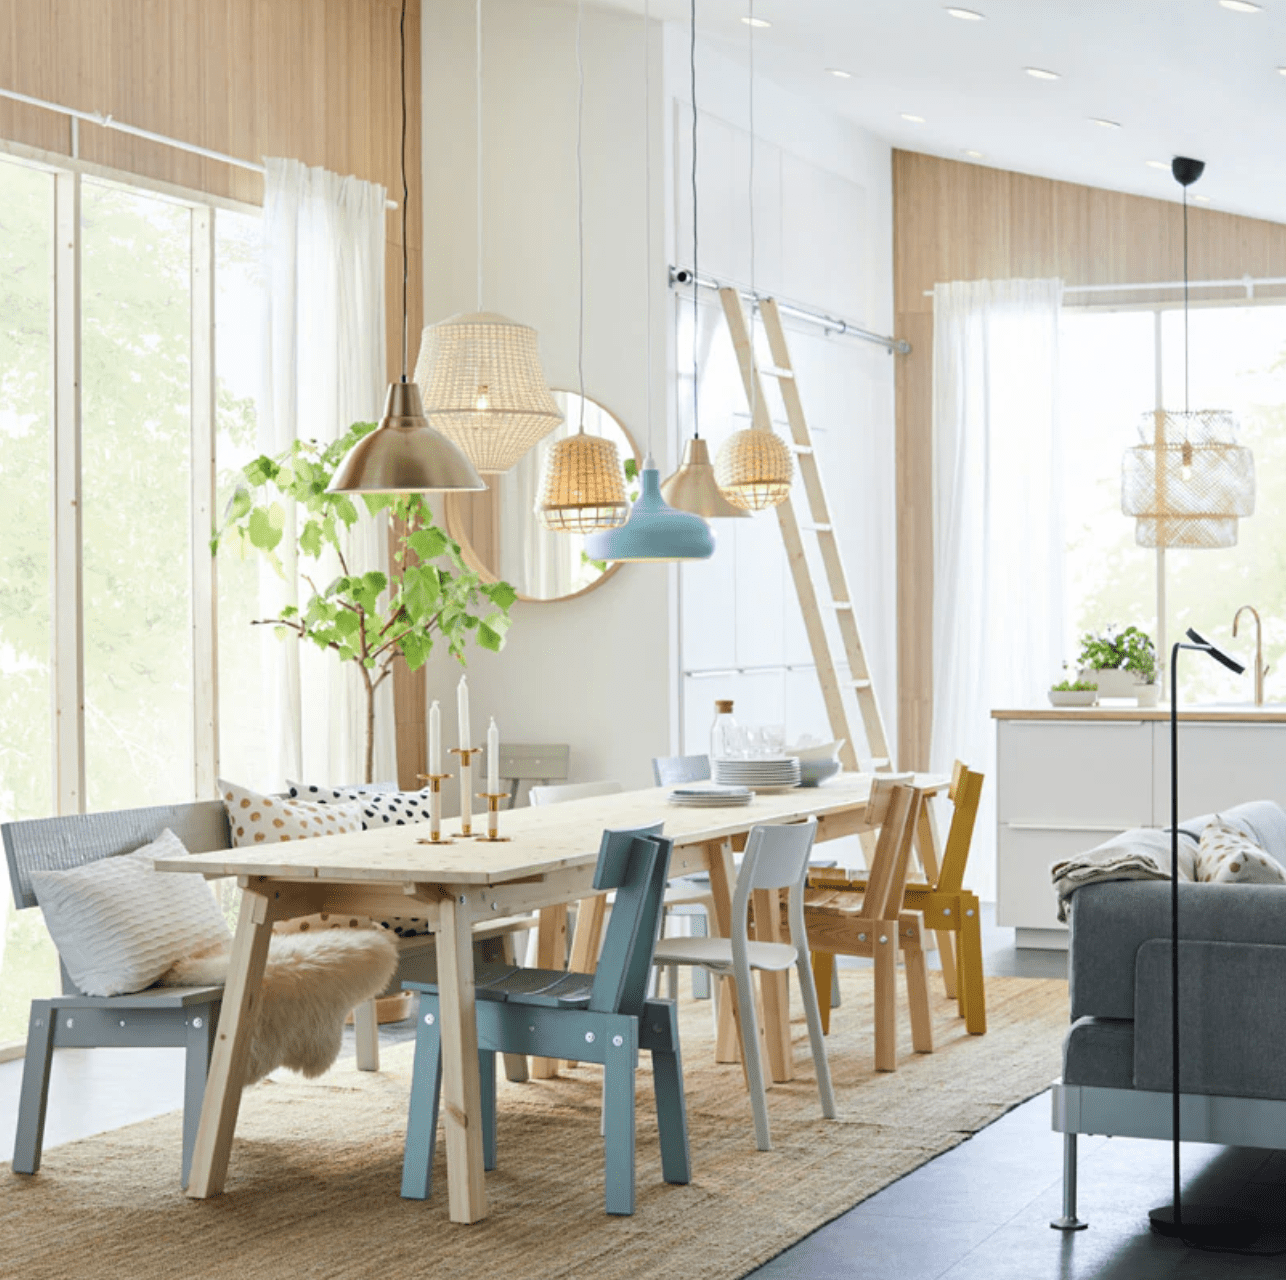 Clever Dining Room Design Ideas to Steal From IKEA   Apartment Therapy